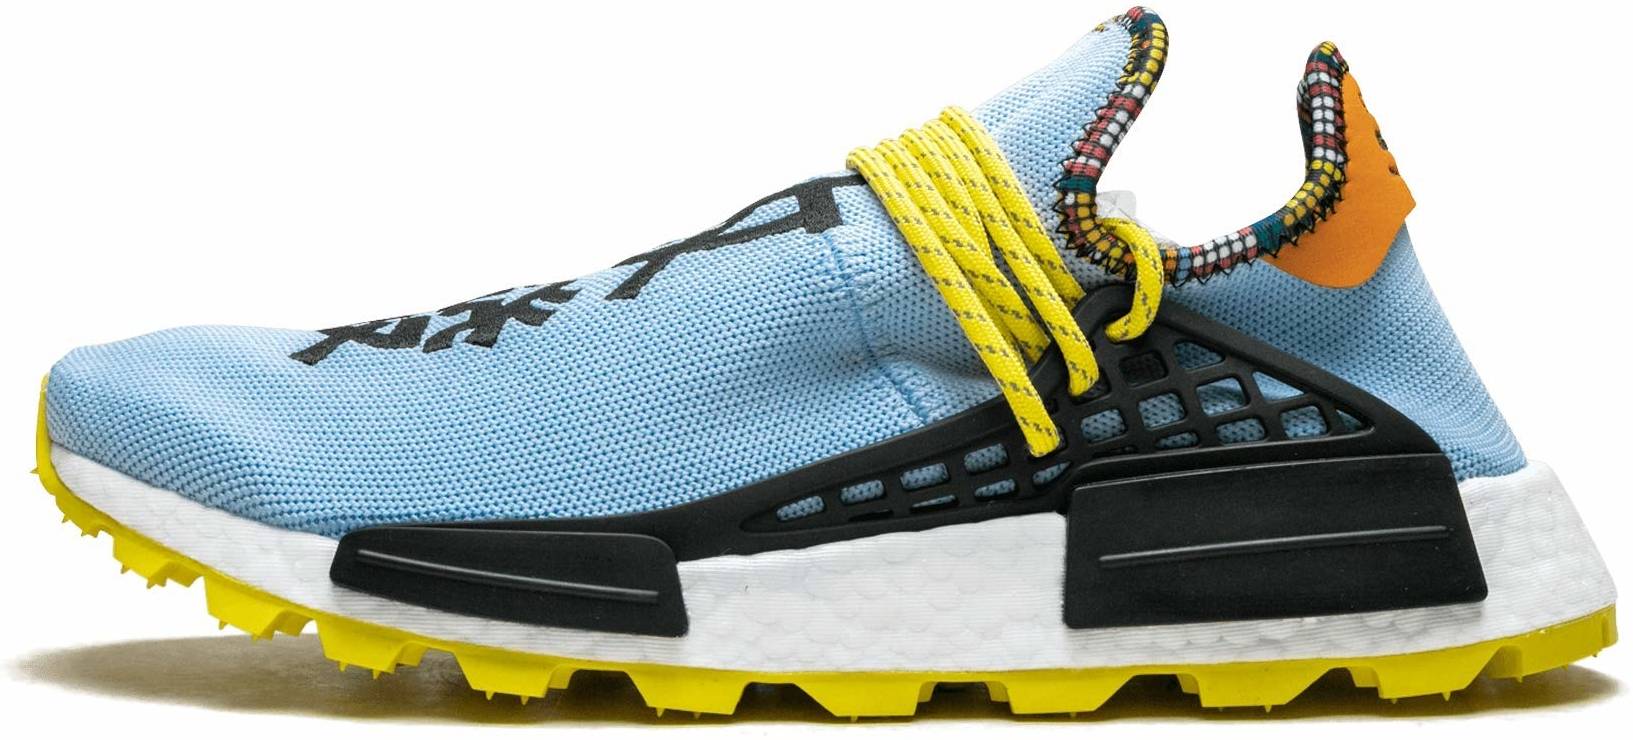 stripe disconnected Perpetual Adidas Pharrell Williams Solar Hu NMD sneakers in 5 colors (only $111) |  RunRepeat